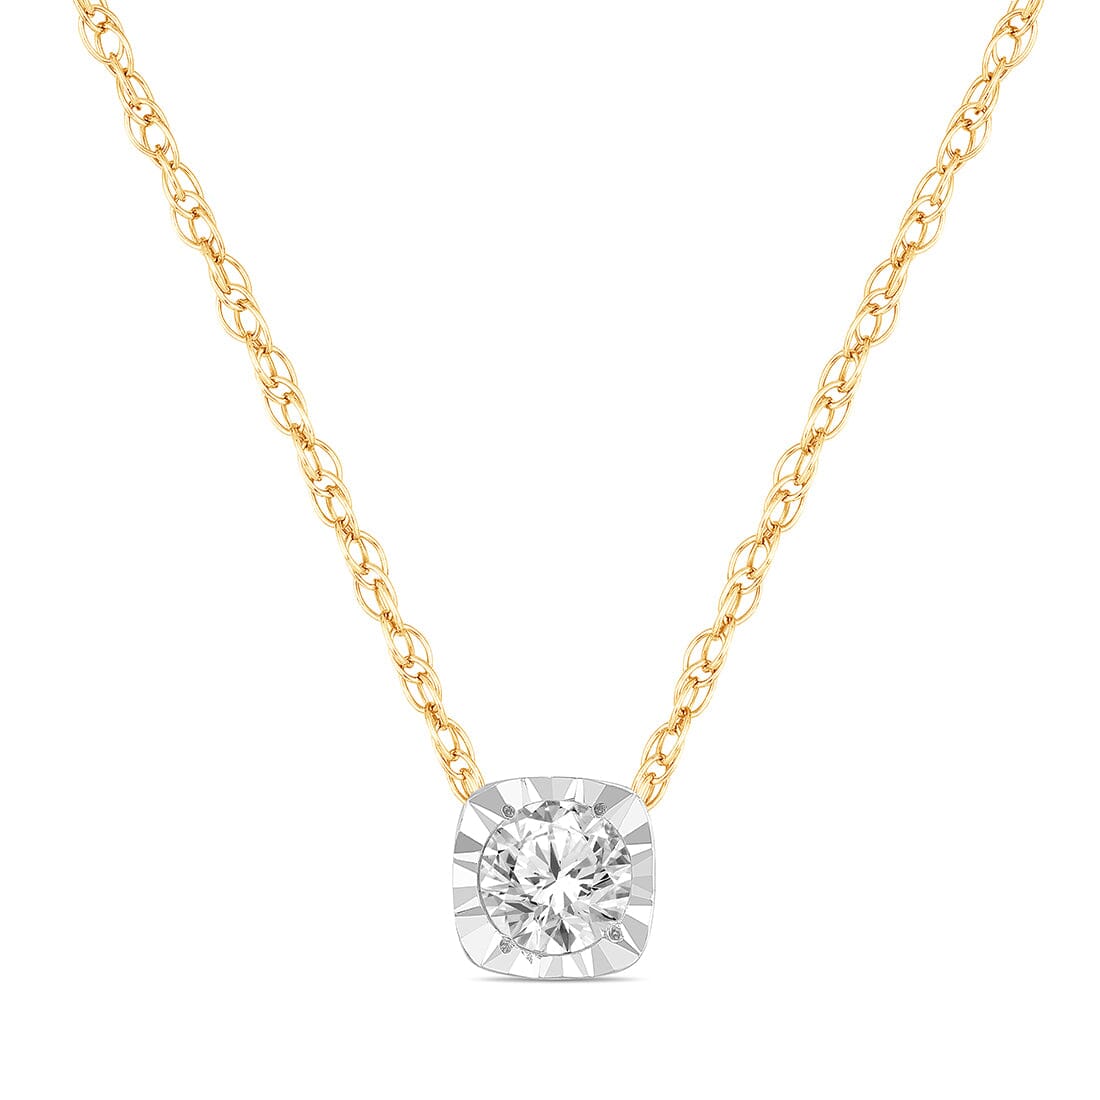 Soft Cushion Look Slider Necklace with 0.10 ct of Diamonds in 9ct Yellow Gold Necklaces Bevilles 